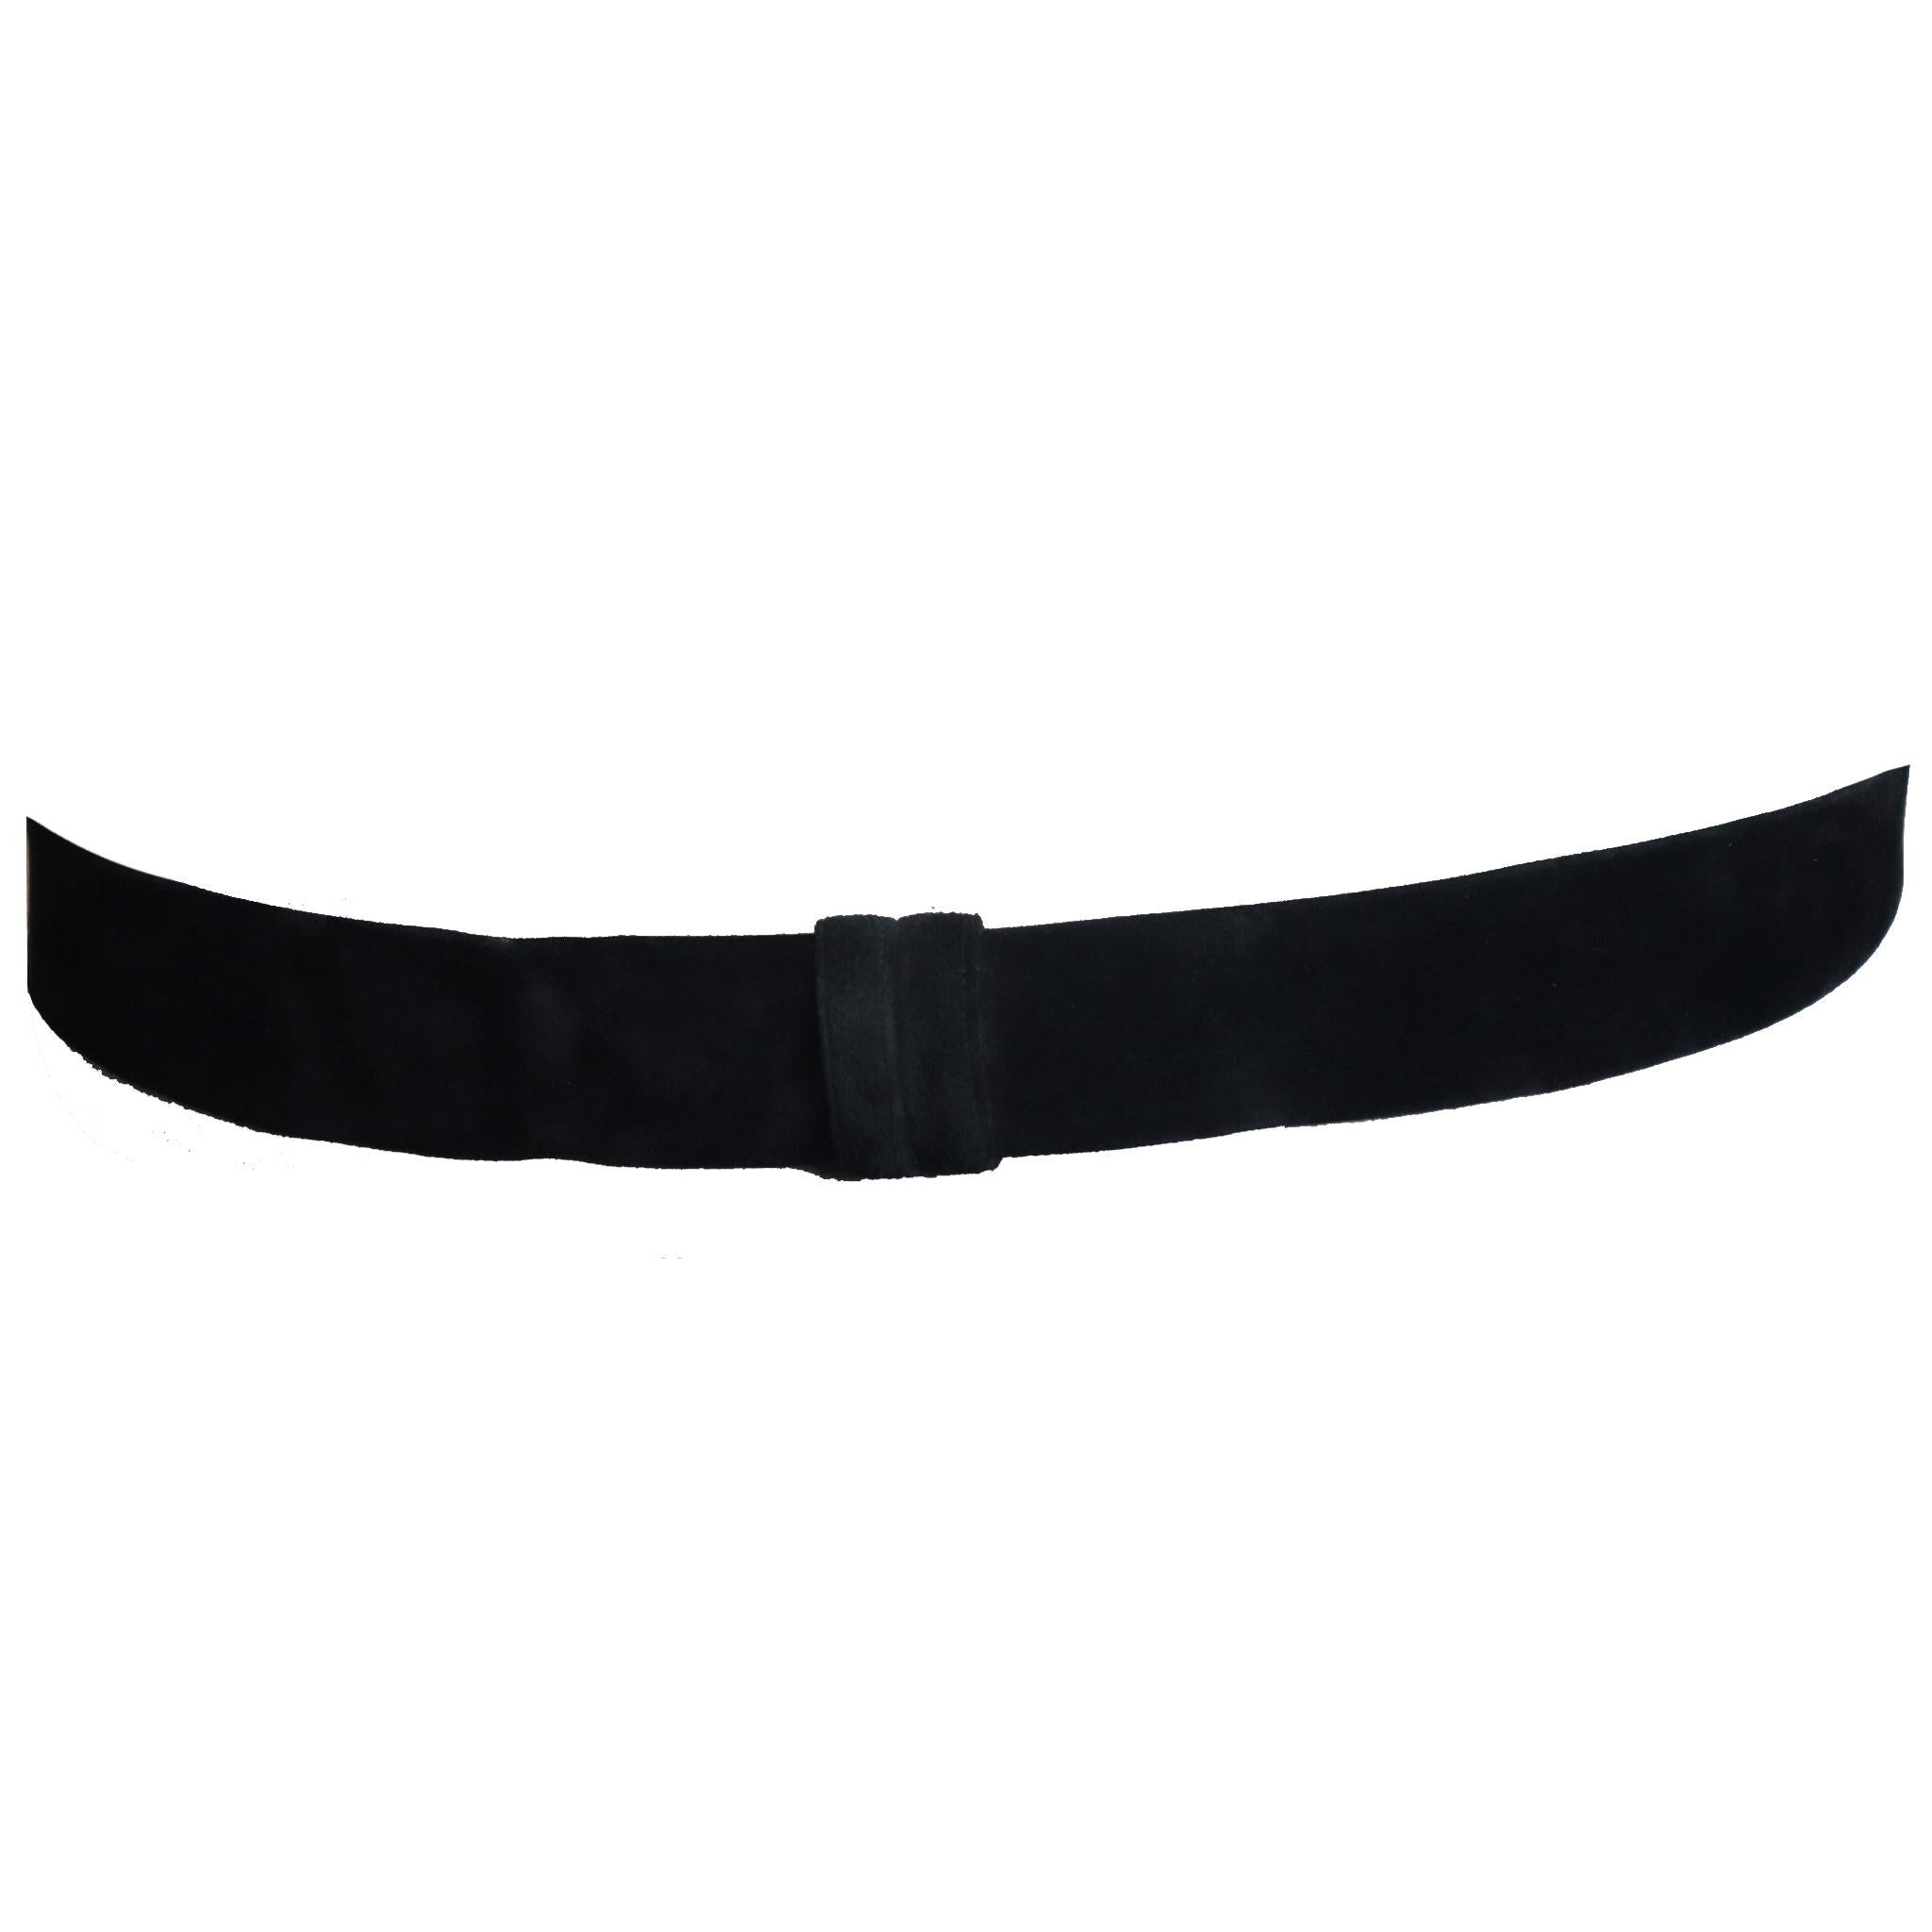 Judith Leiber Black Suede Leather Belt w/ Gold Square Buckle Circa 1990s. In excellent condition 

Measurements- 

Longest length: 34 Inches
Shortest length: 26 Inches